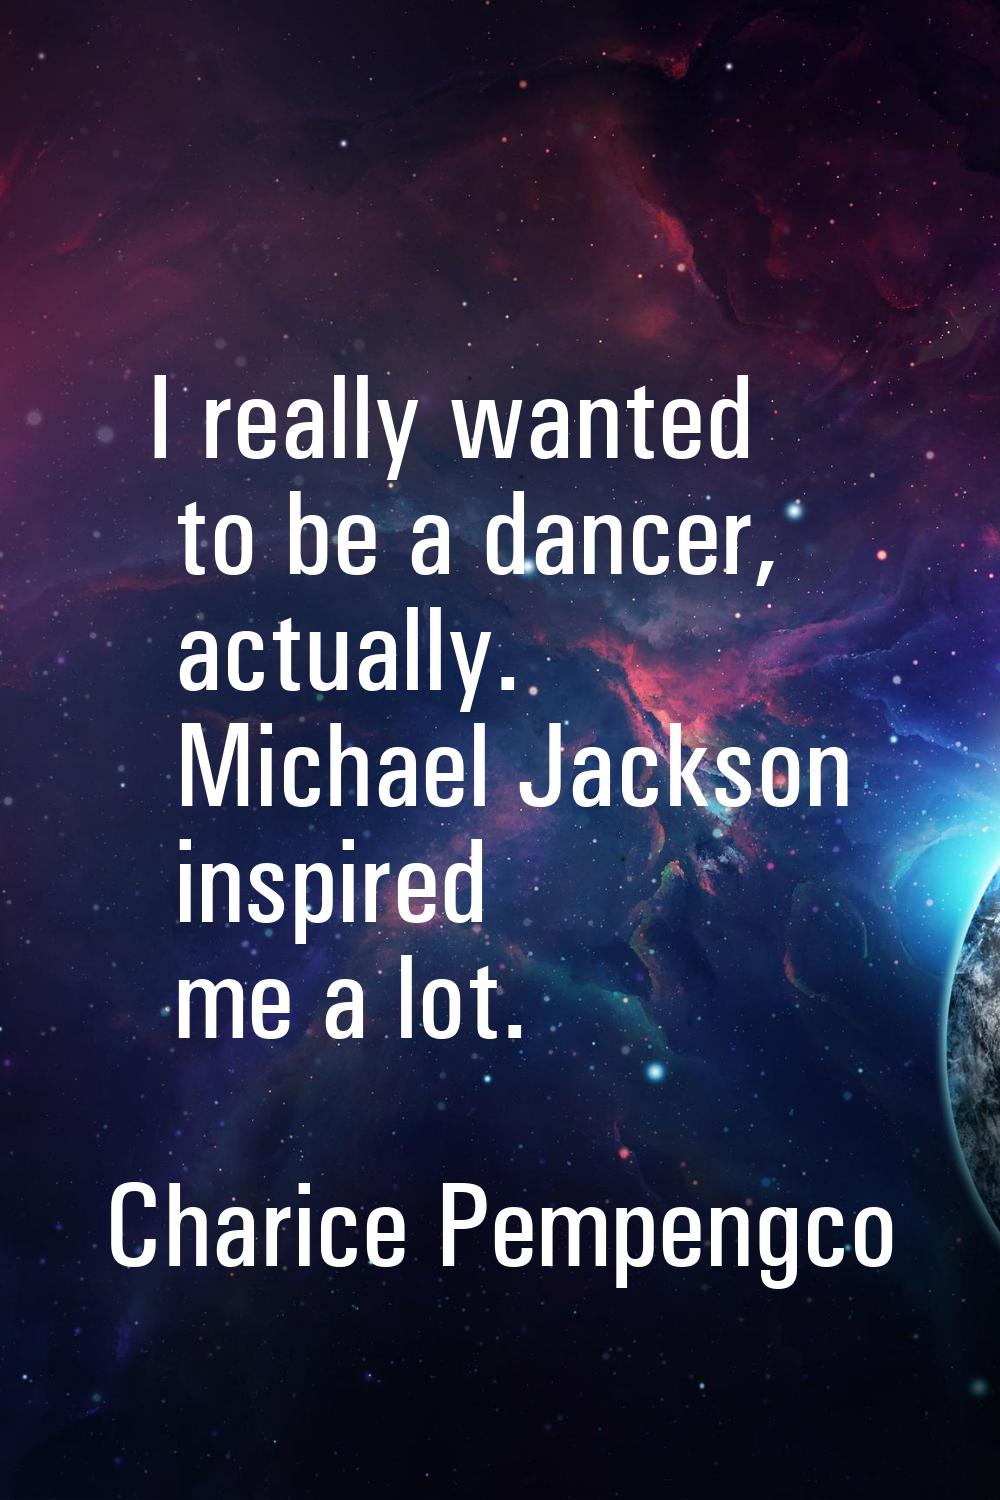 I really wanted to be a dancer, actually. Michael Jackson inspired me a lot.